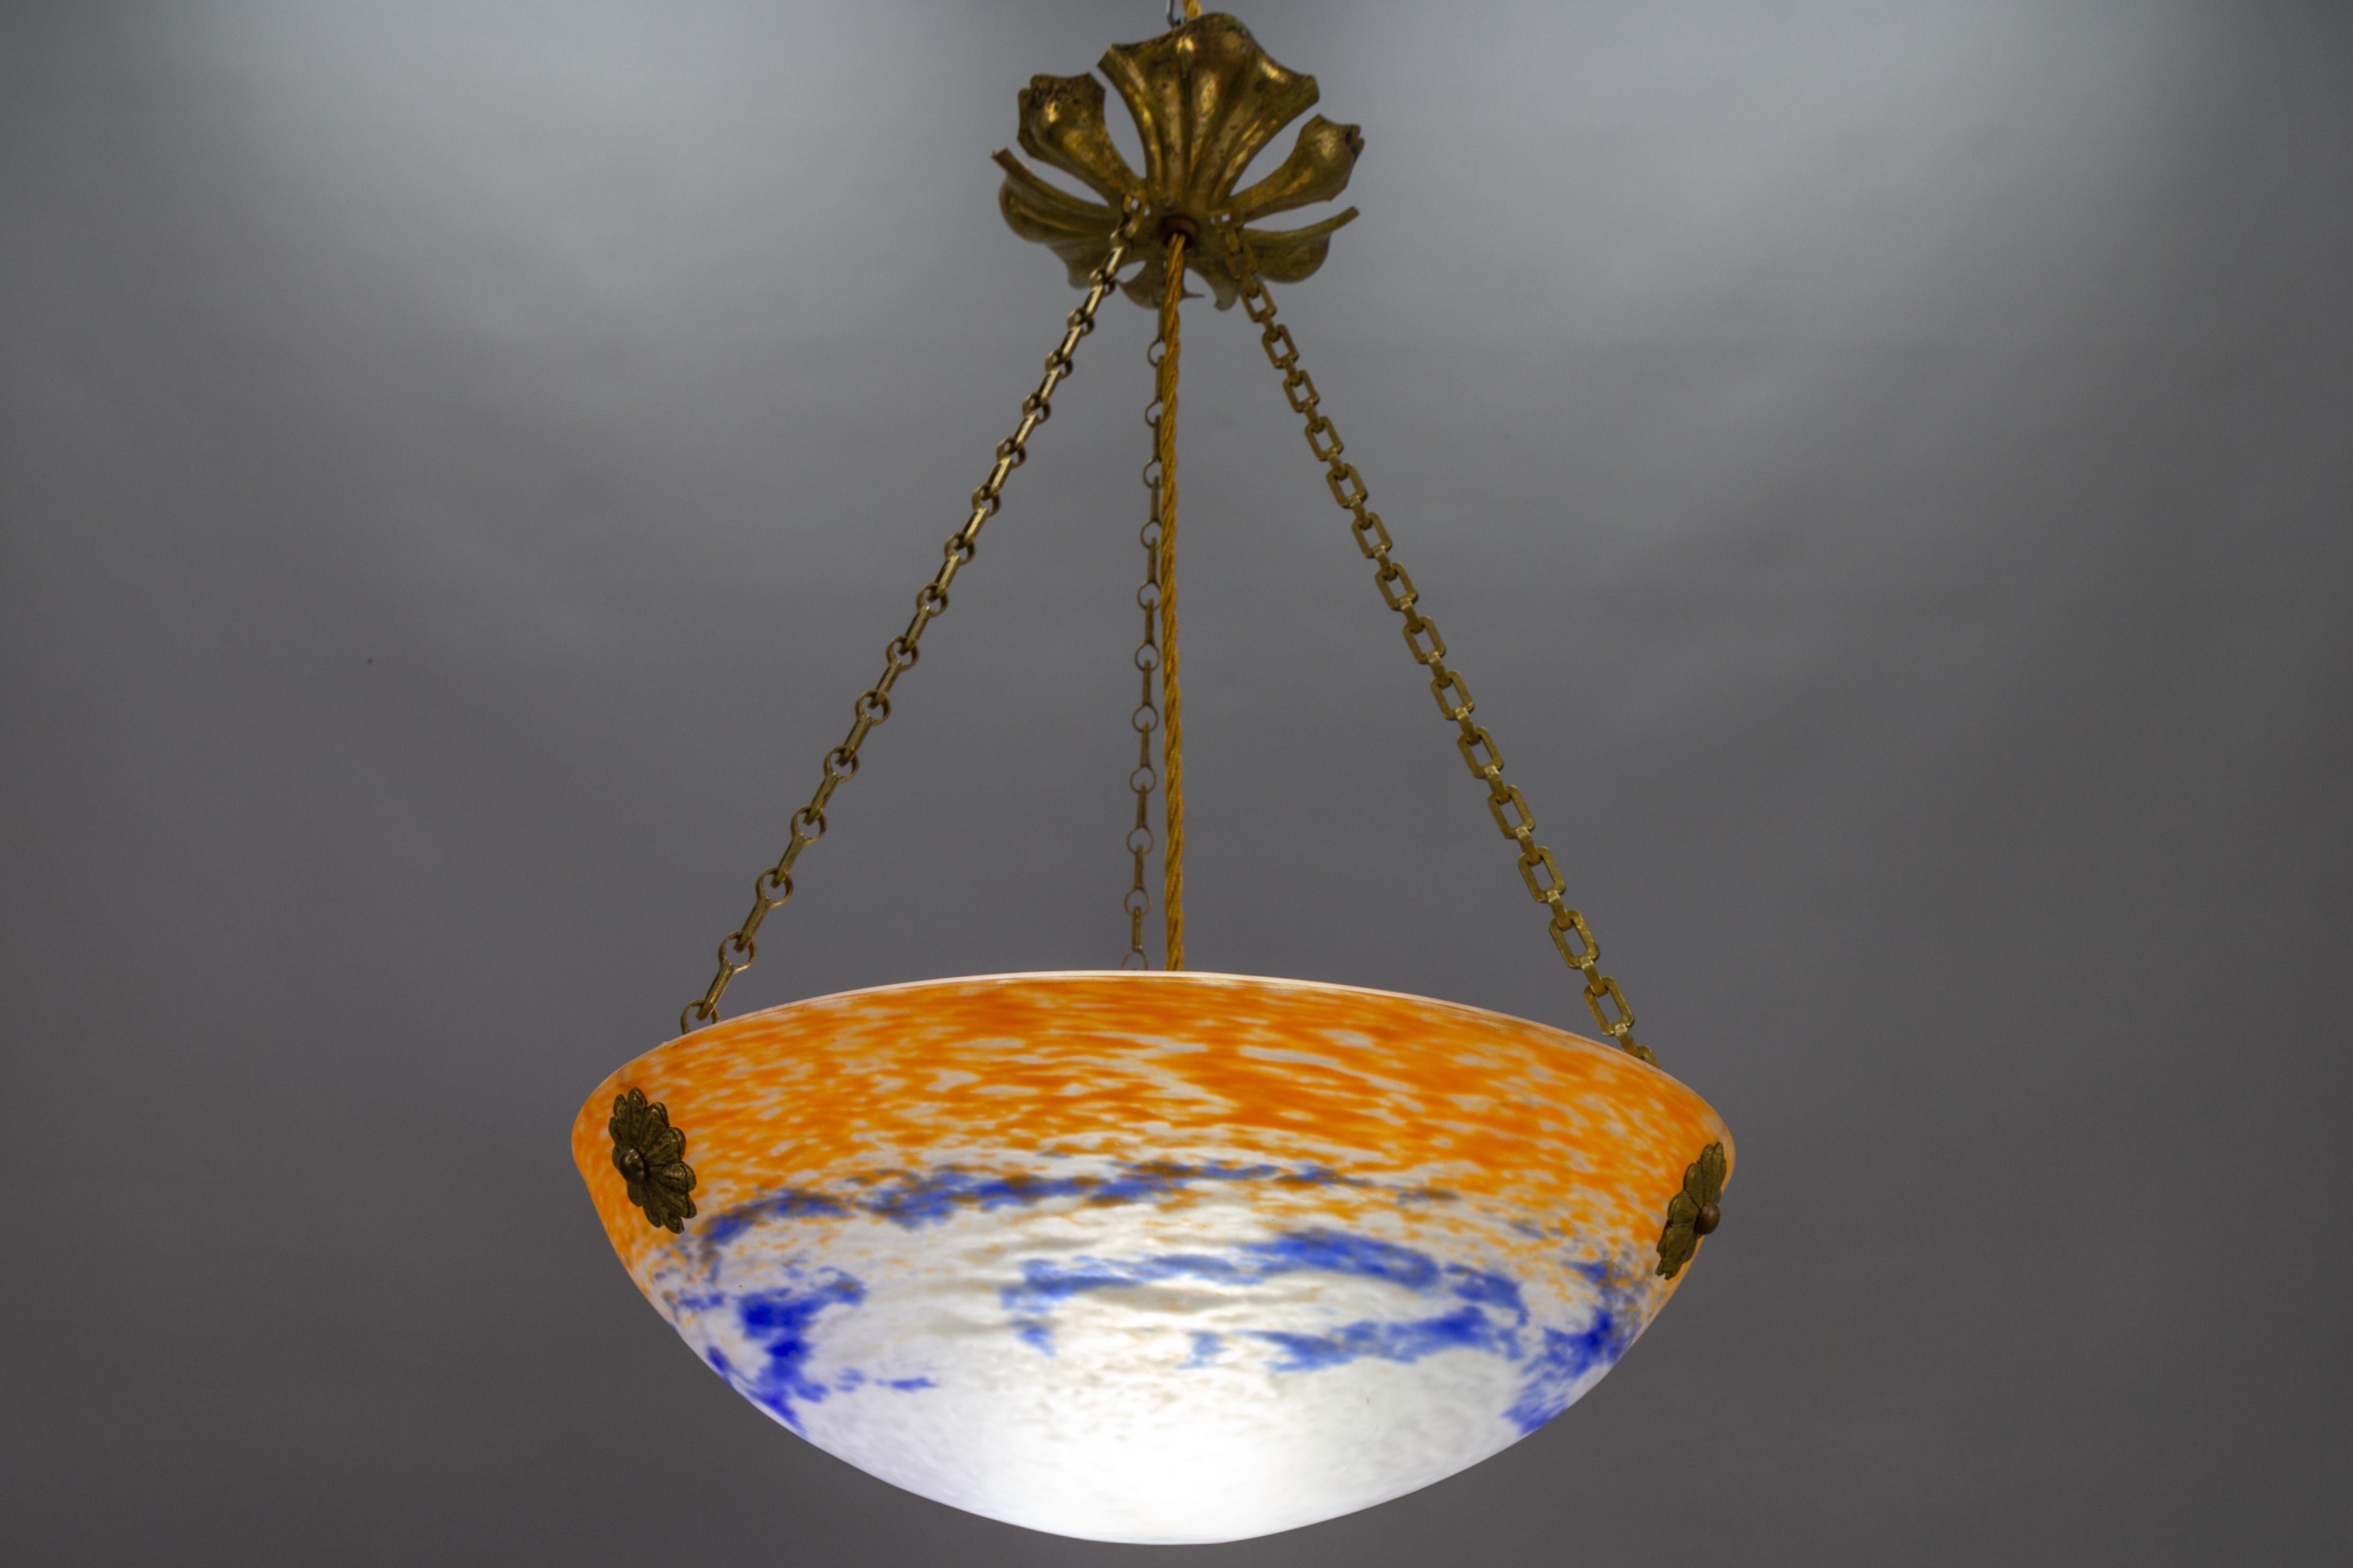 French Art Nouveau Orange, White and Blue Glass Pendant Light by Noverdy, 1920s For Sale 5